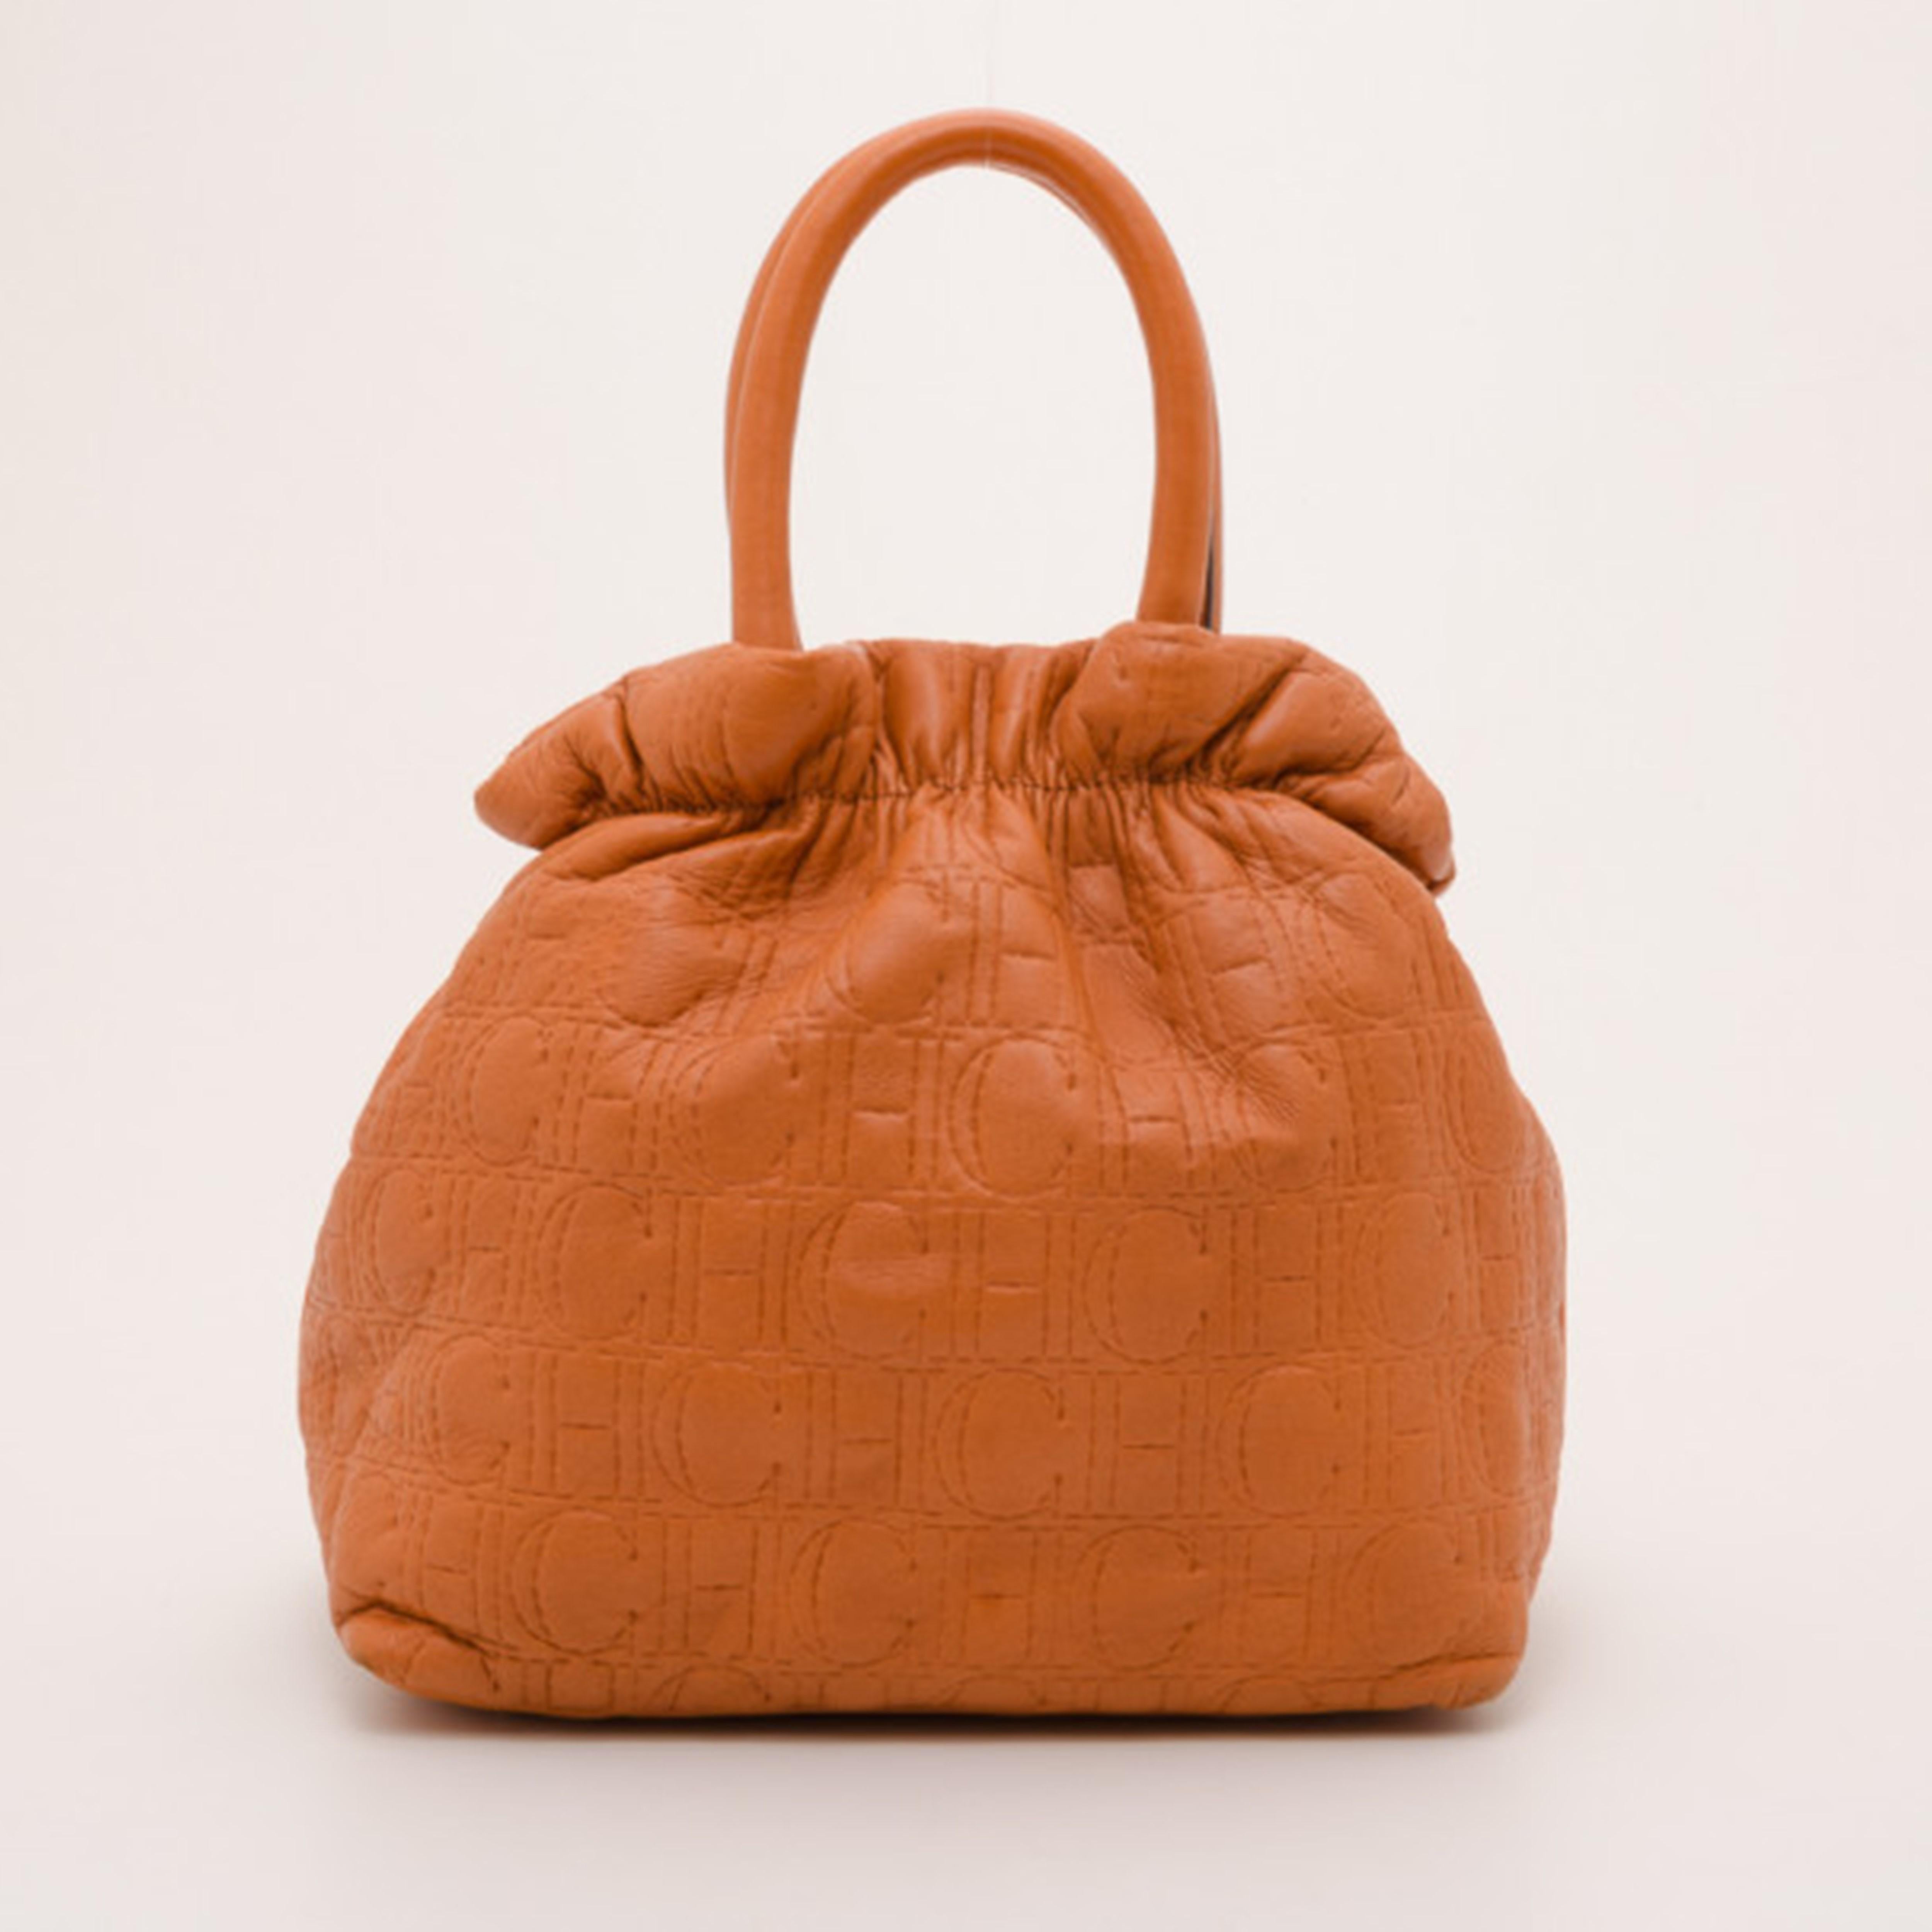 Look fabulous while carrying all your essentials in this elegantly shaped orange pleated bag by Carolina Herrera. With an exterior made from stunning orange CH stitched leather, this lovely bag features a top pleating design, a large CH HC charm and